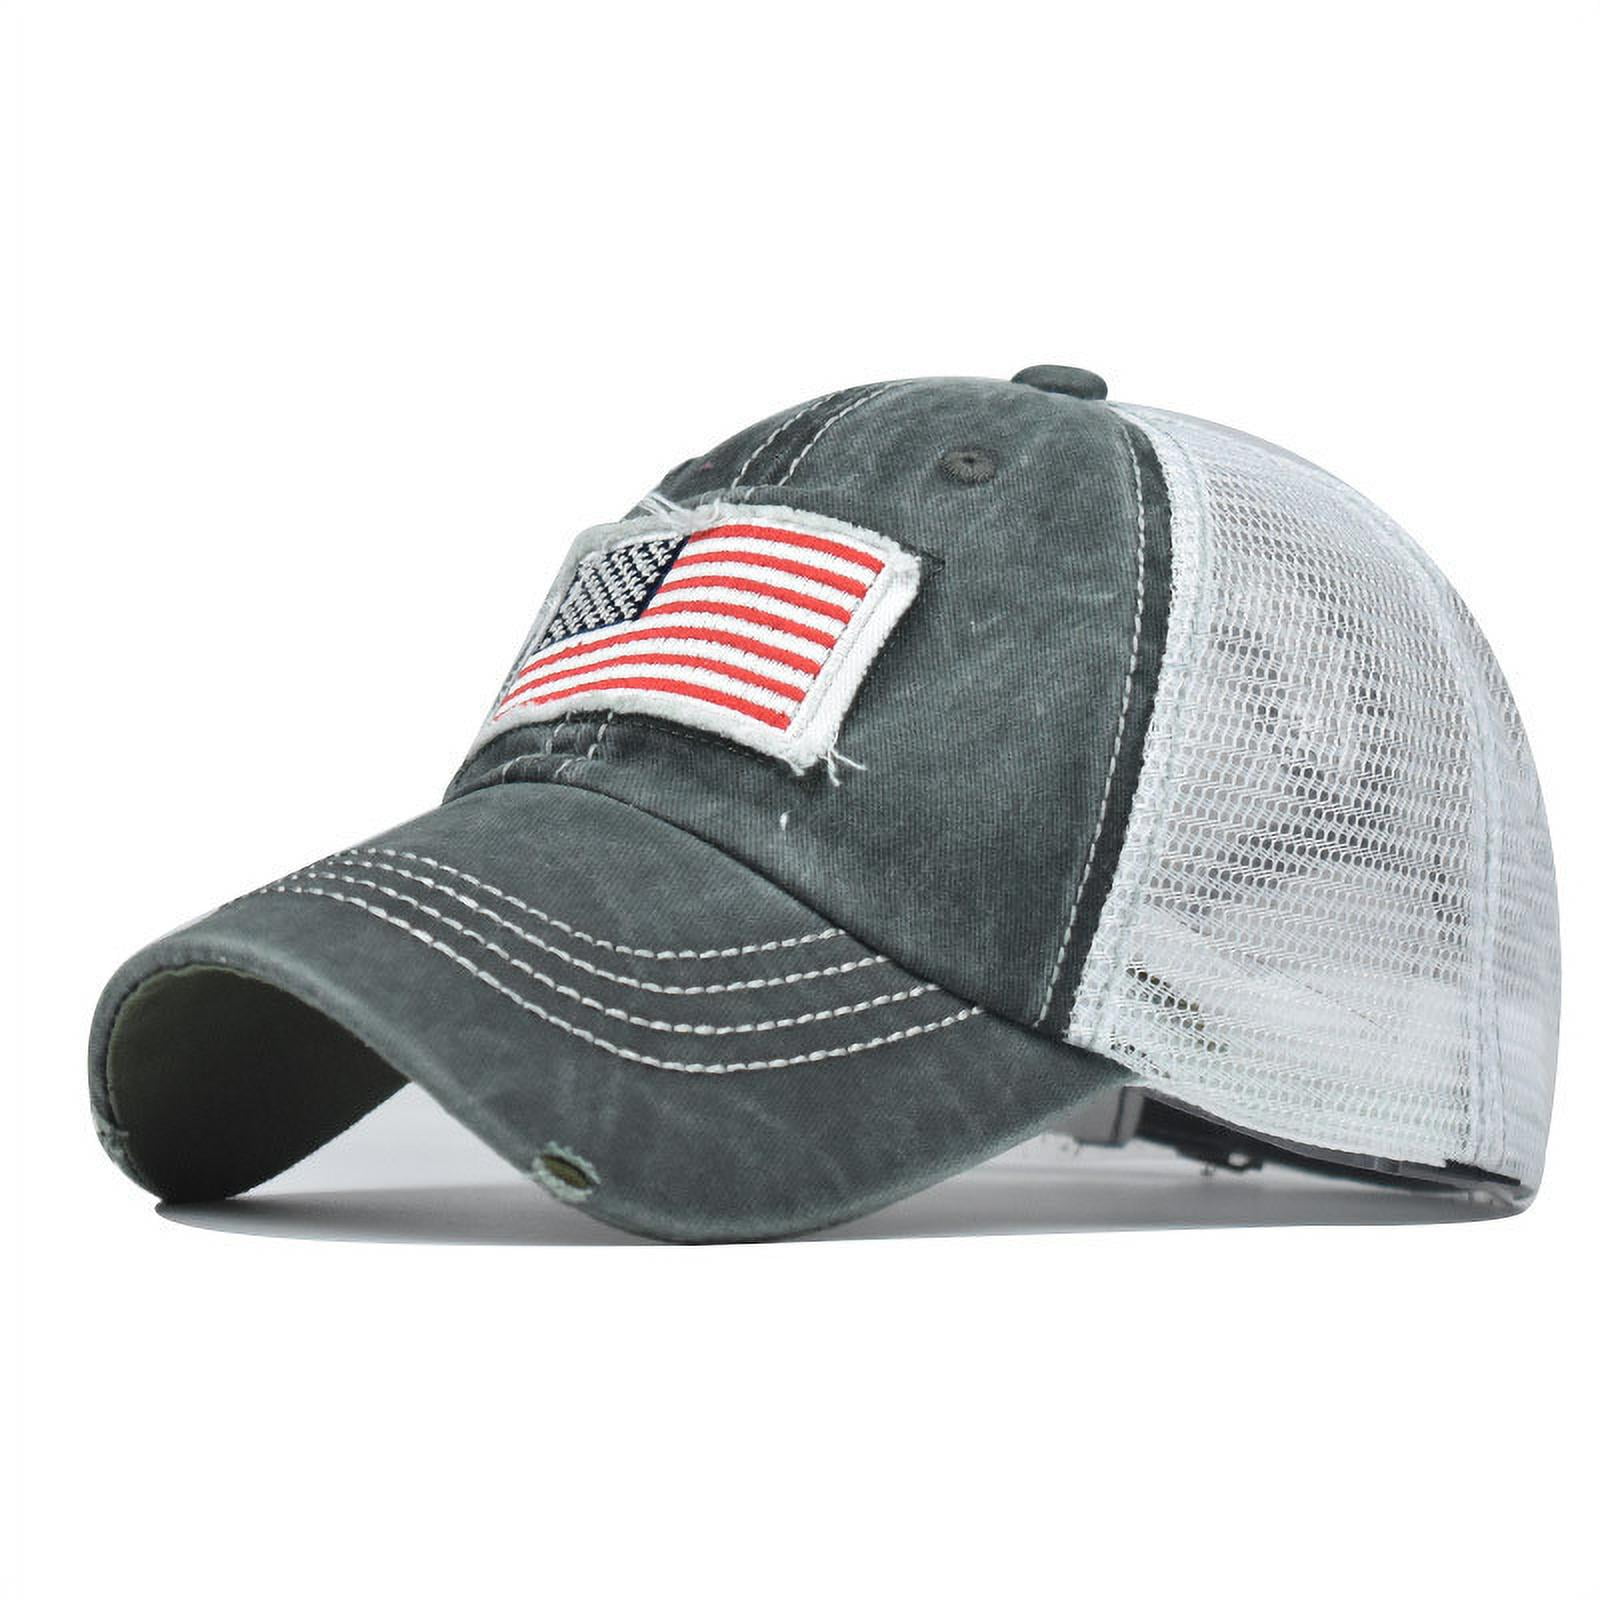 4Th of July Caps Sports Men Embroidery Profile Adjustable Low Cap Baseball for Flag Baseball Vintage American 90S Hats